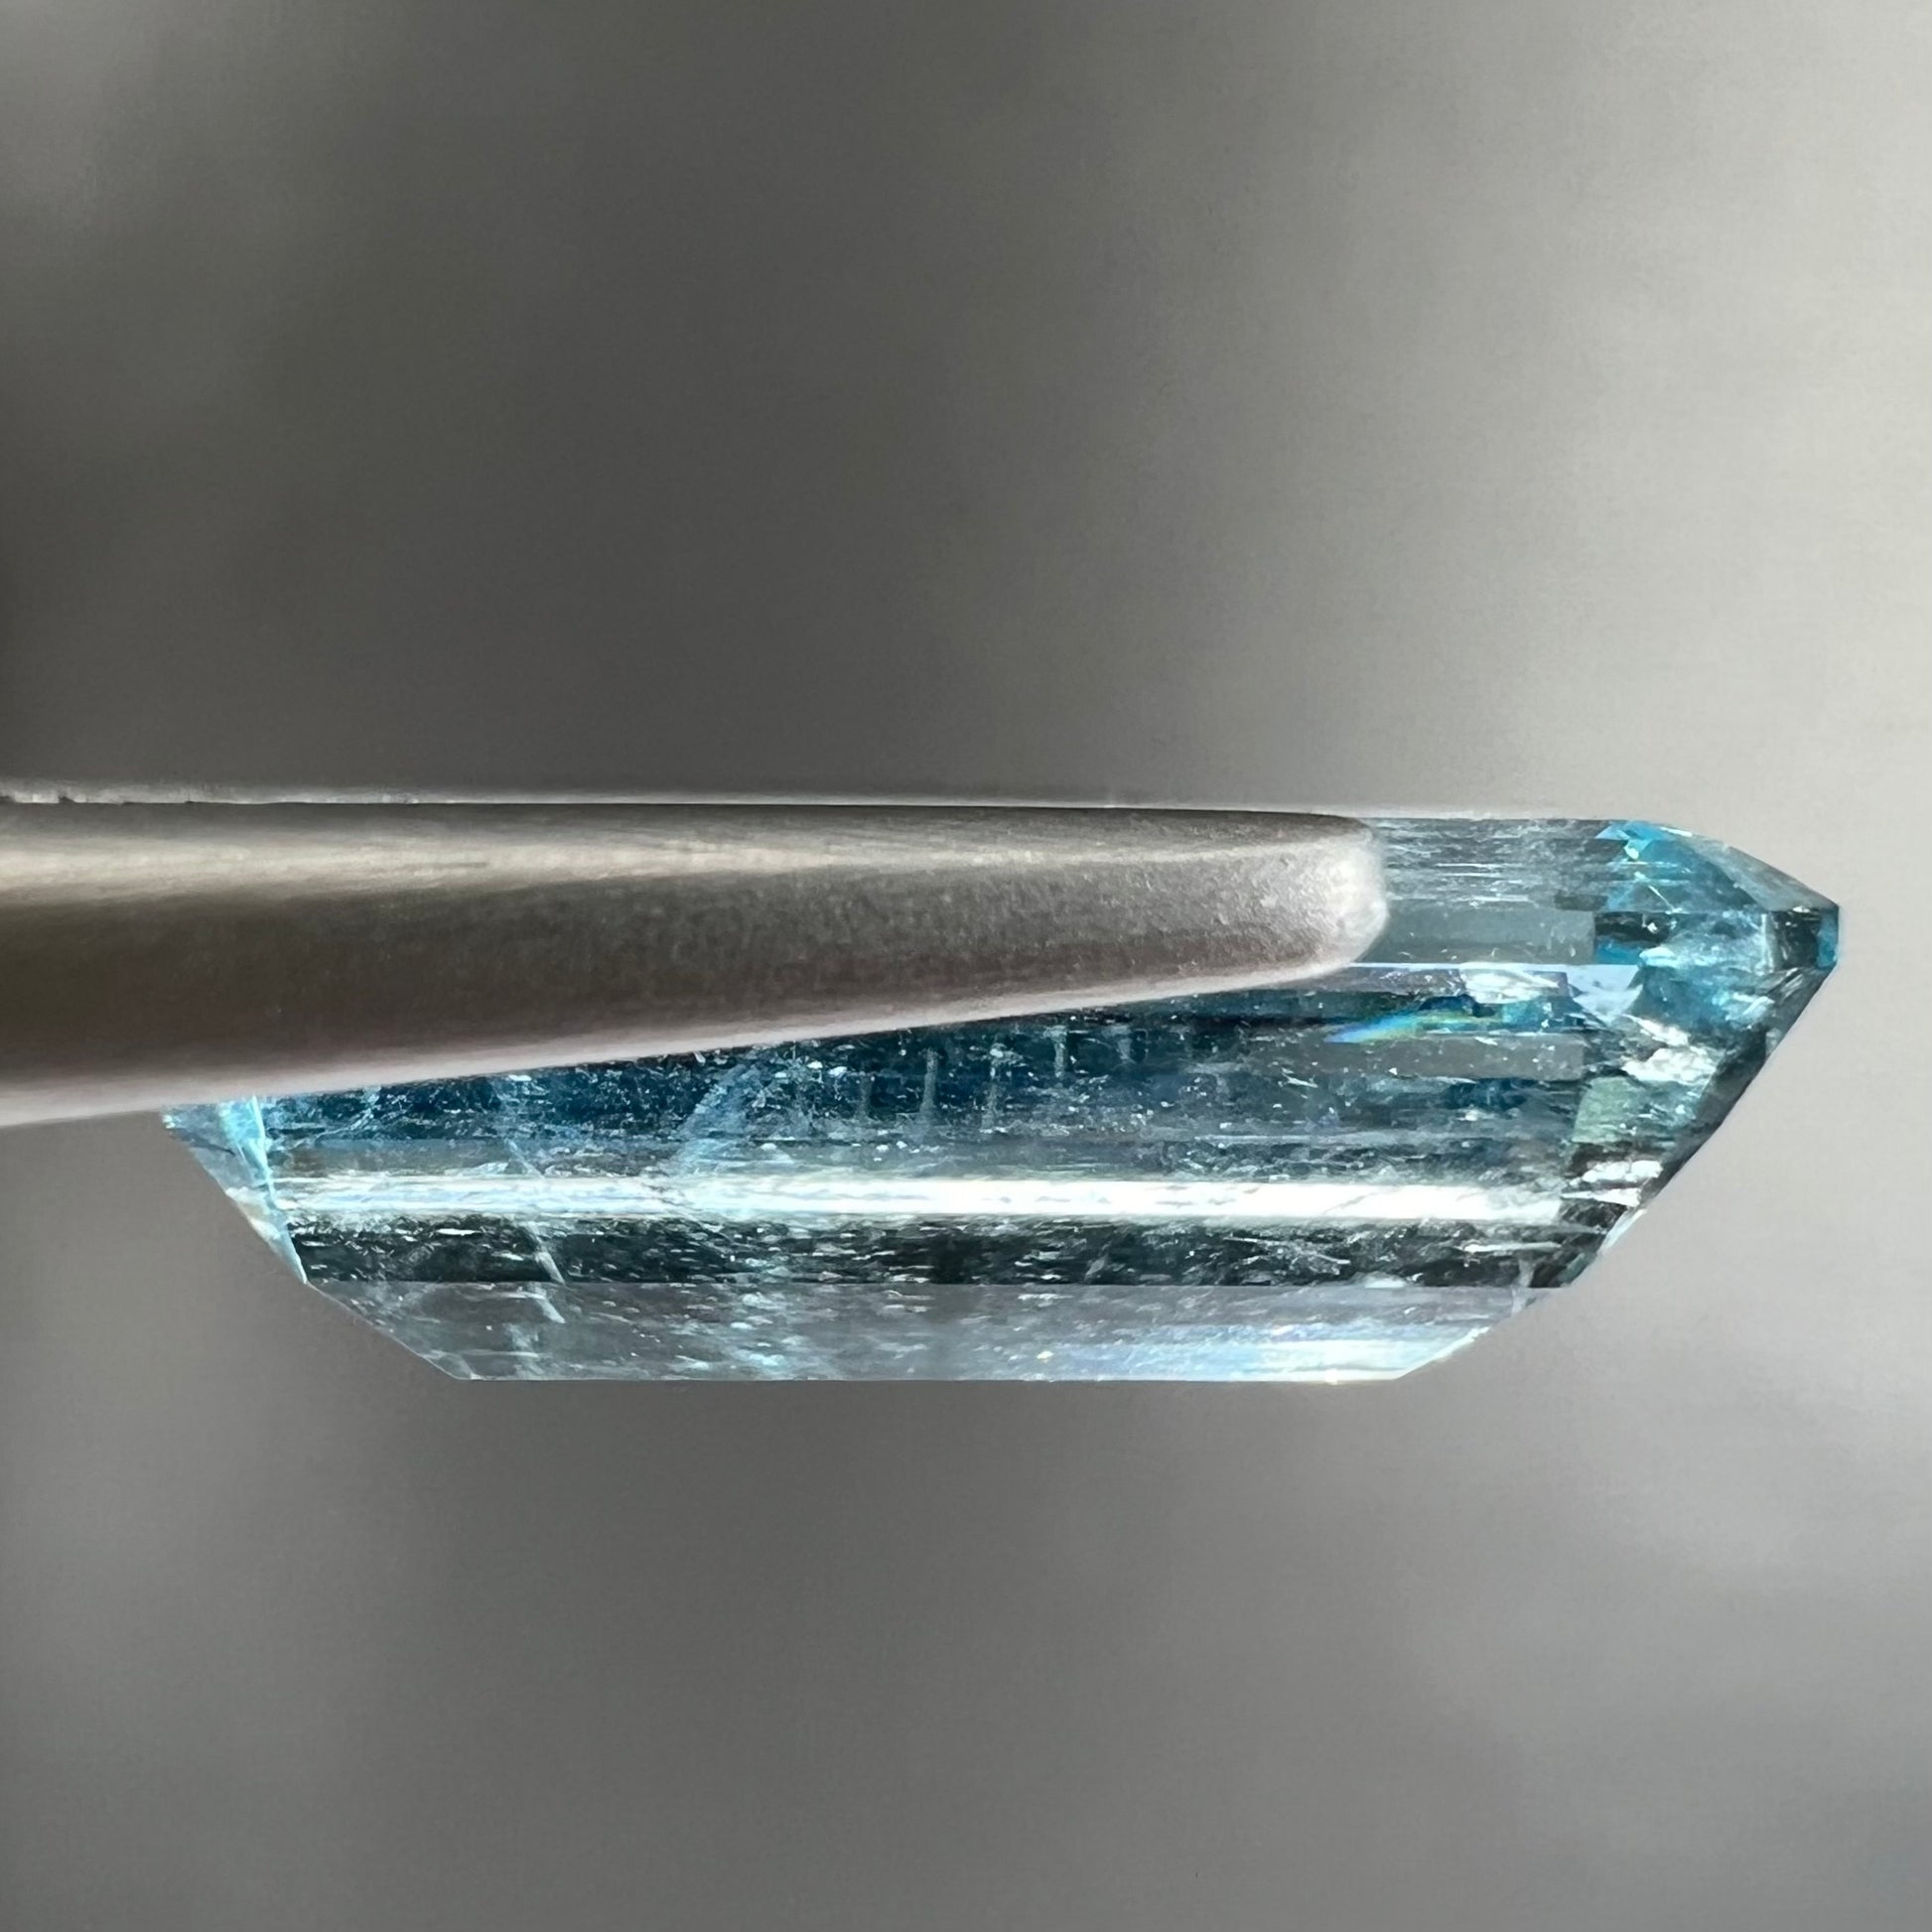 A loose, emerald cut aquamarine stone from Vietnam.  The stone is an ice blue color.